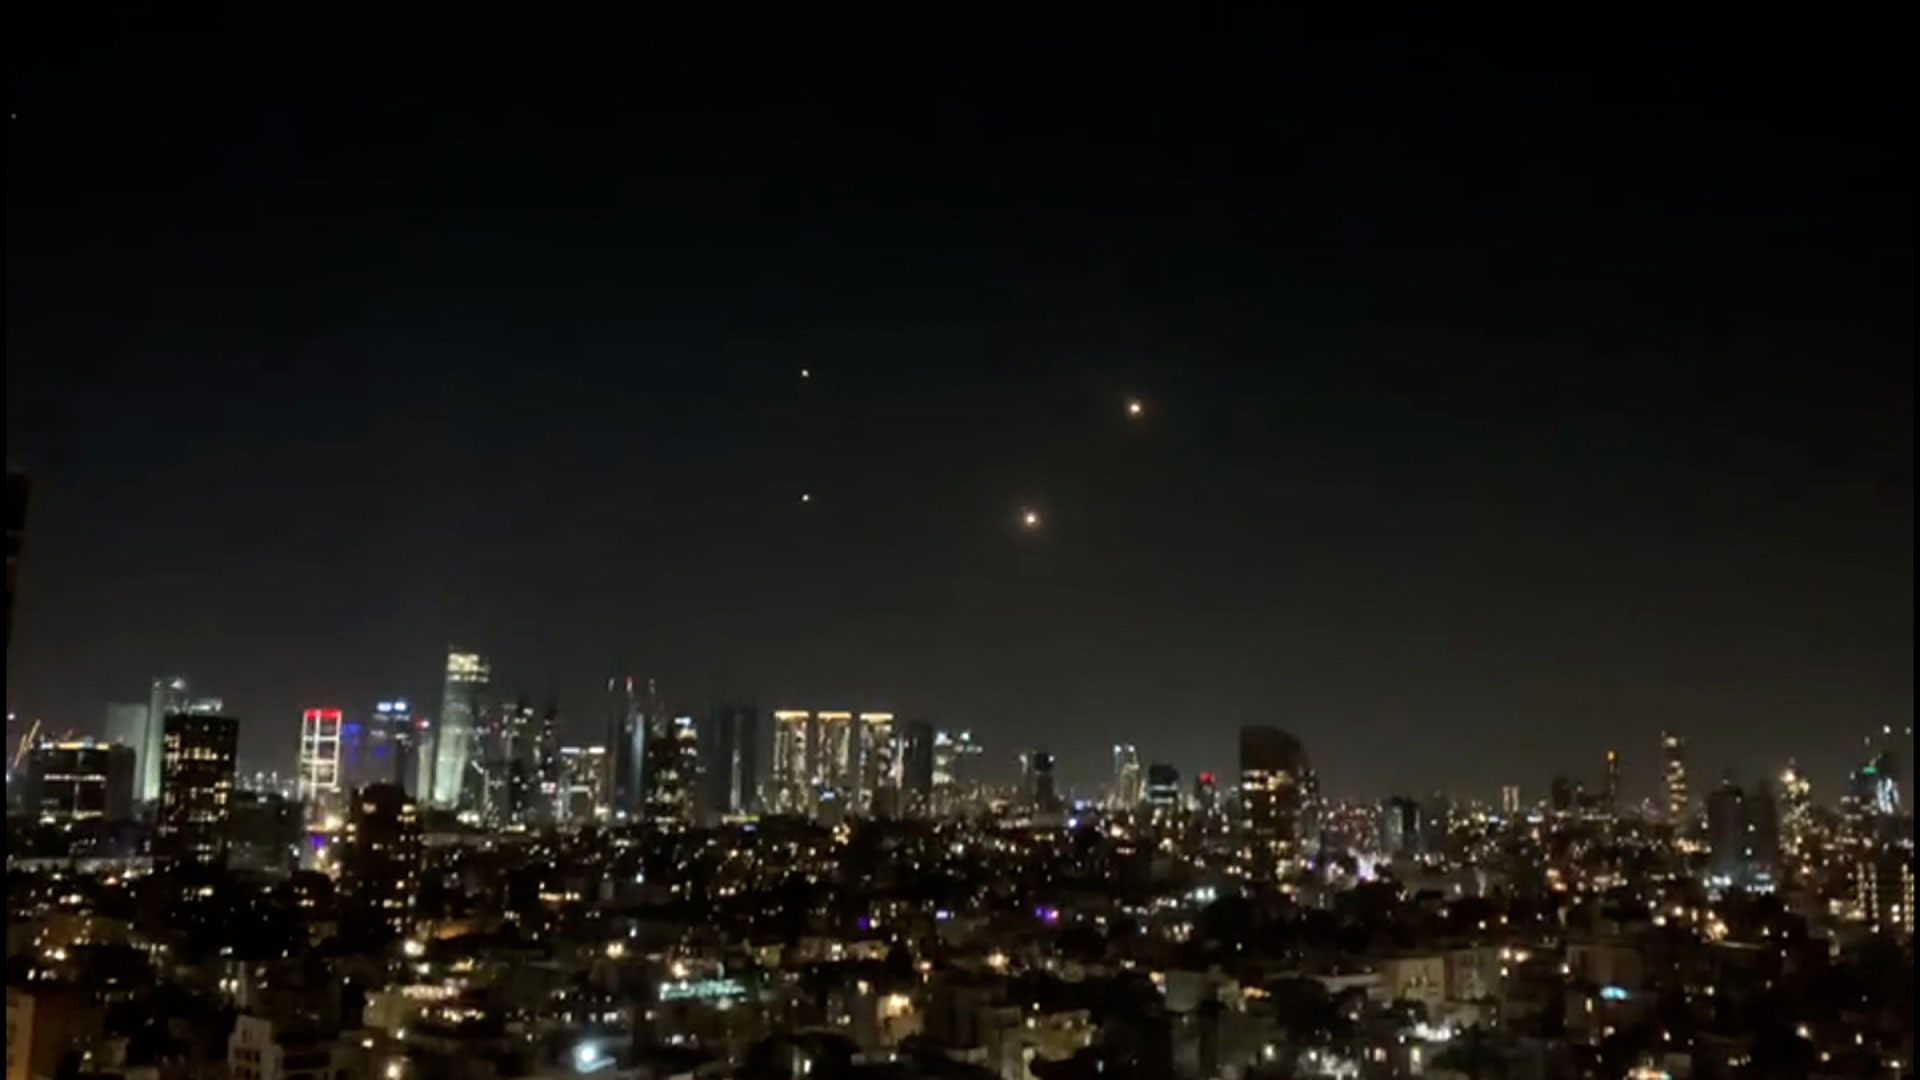 The Iron Dome defense system launches interceptors as sirens warn of incoming rockets over central Tel Aviv, Israel, on Saturday, December 2.